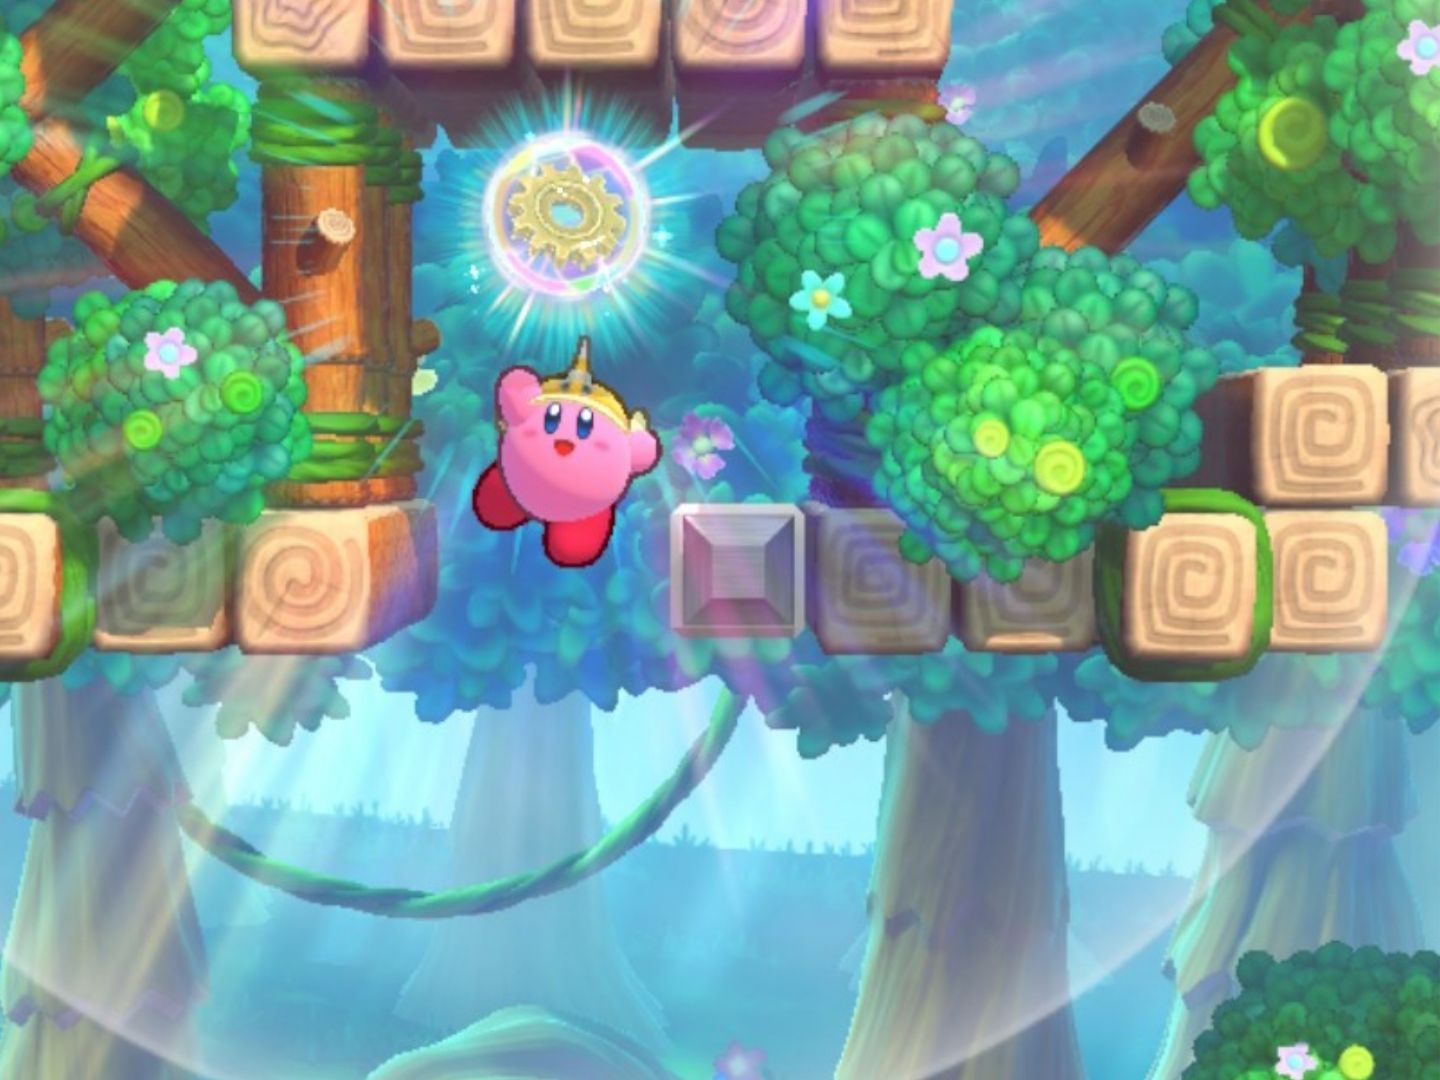 Kirby jumps up to receive an Energy Sphere.